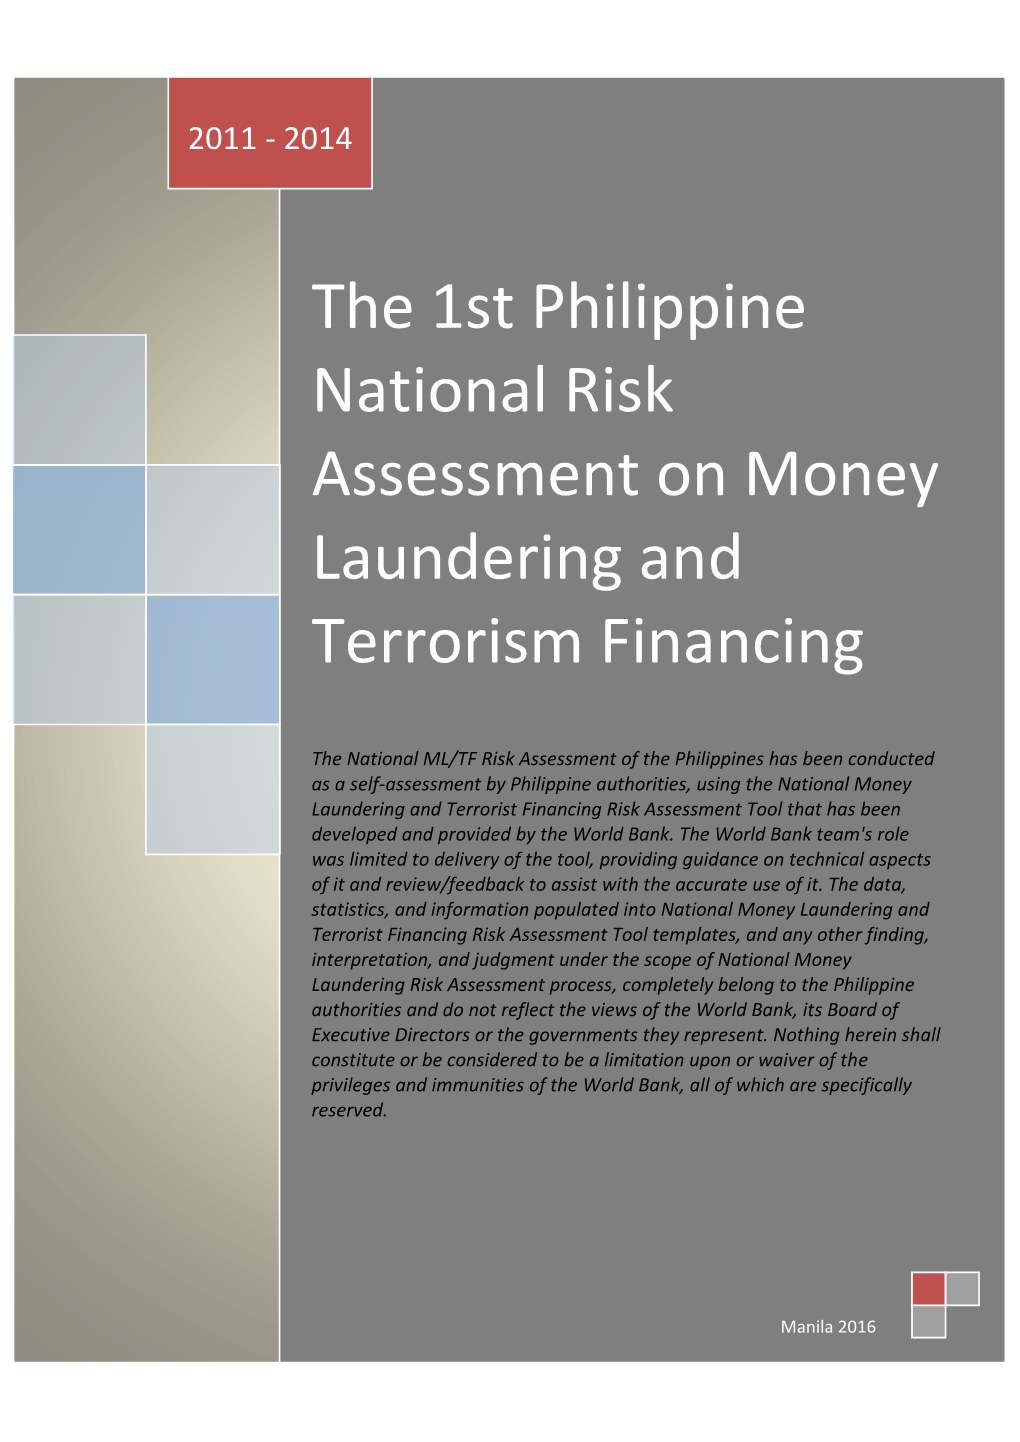 The 1St Philippine National Risk Assessment on Money Laundering and Terrorism Financing